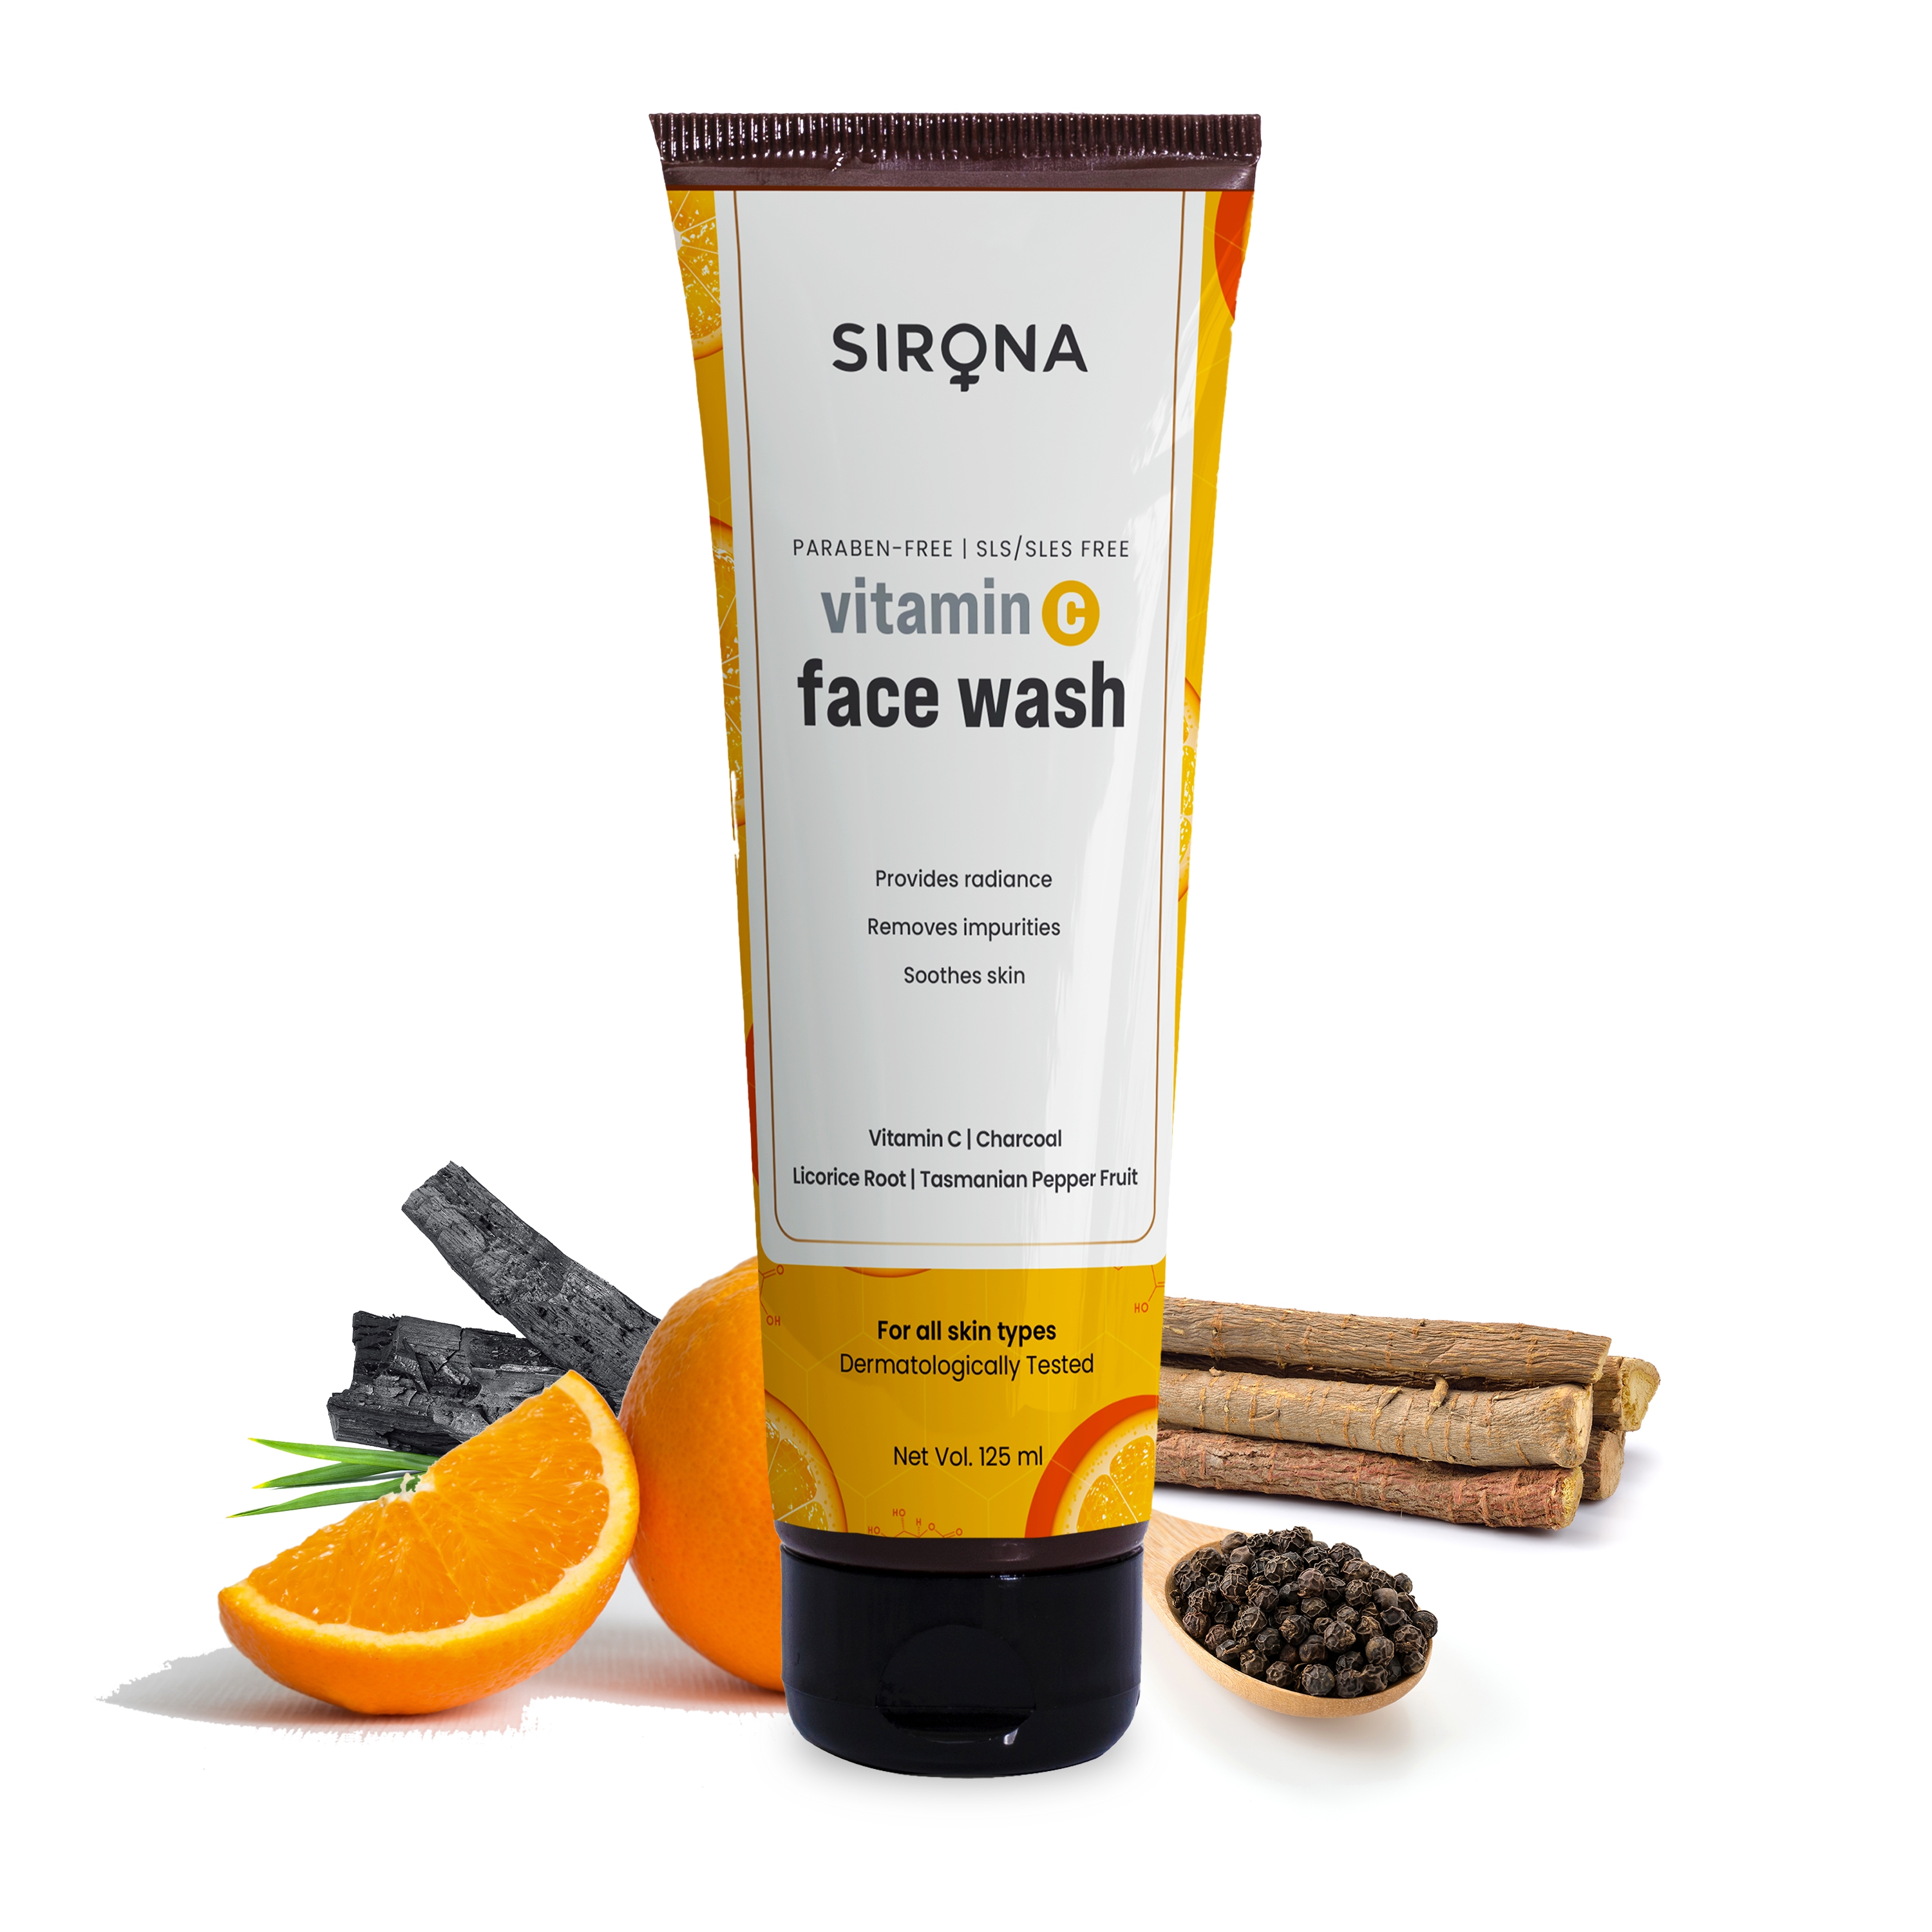 Sirona | Sirona Vitamin C Face Wash For Men & Women – 125 Ml With Charcoal Licorice Root & Tasmanian Pepper Fruit